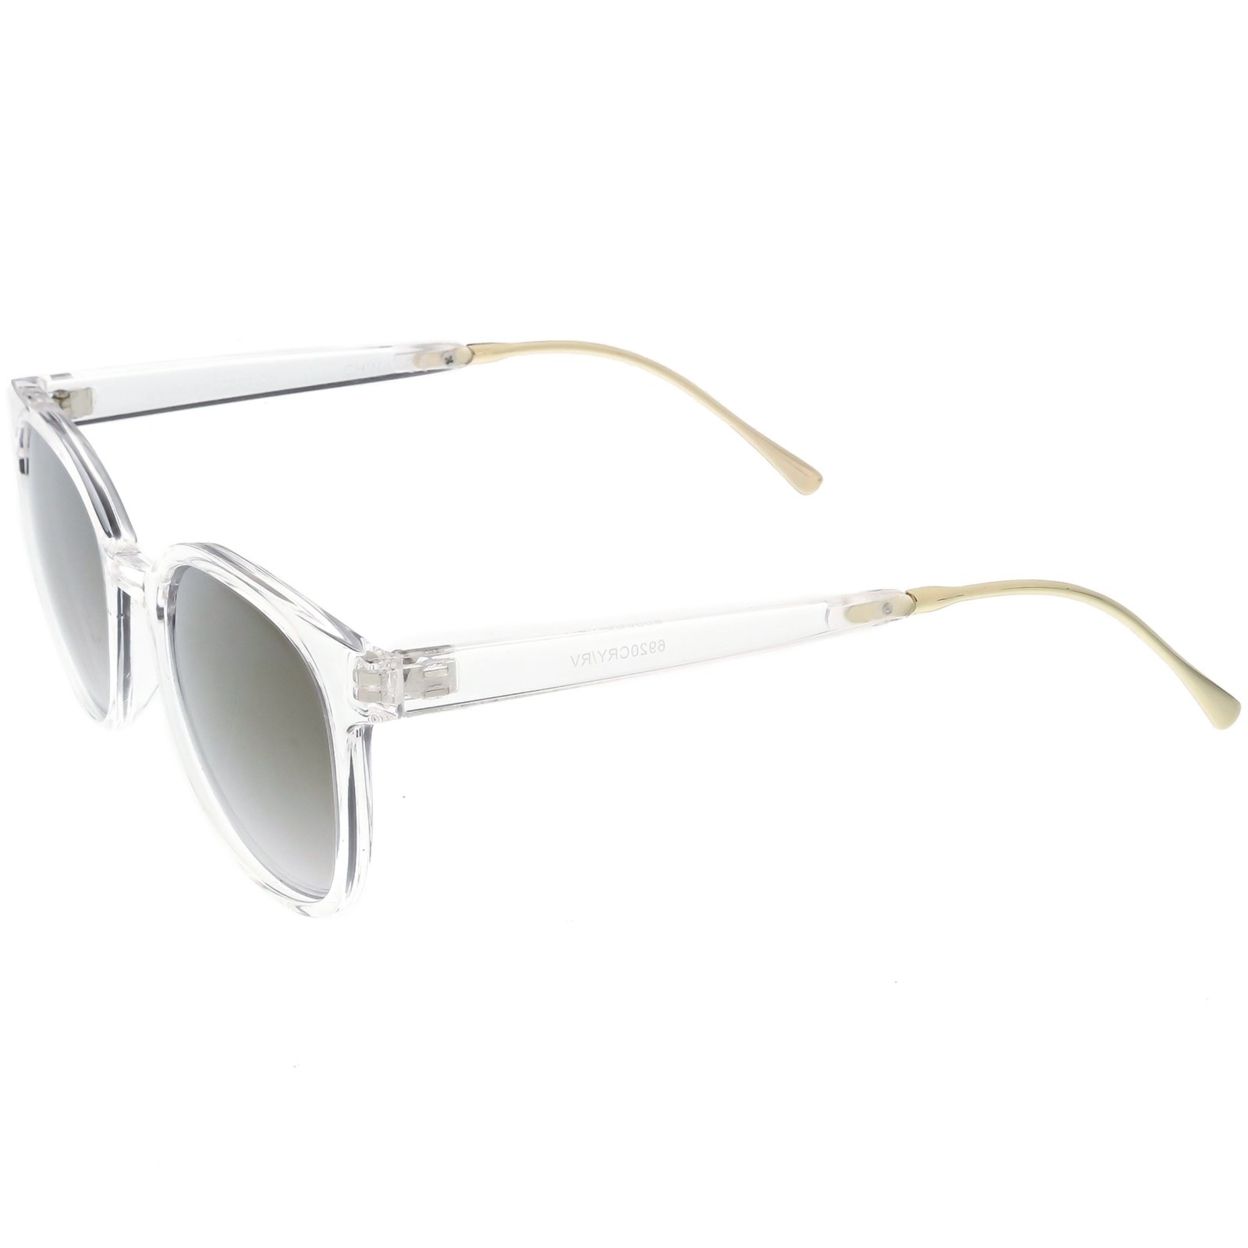 Modern Translucent Horn Rimmed Sunglasses With Round Mirrored Lens 52mm - Smoke / Silver Mirror